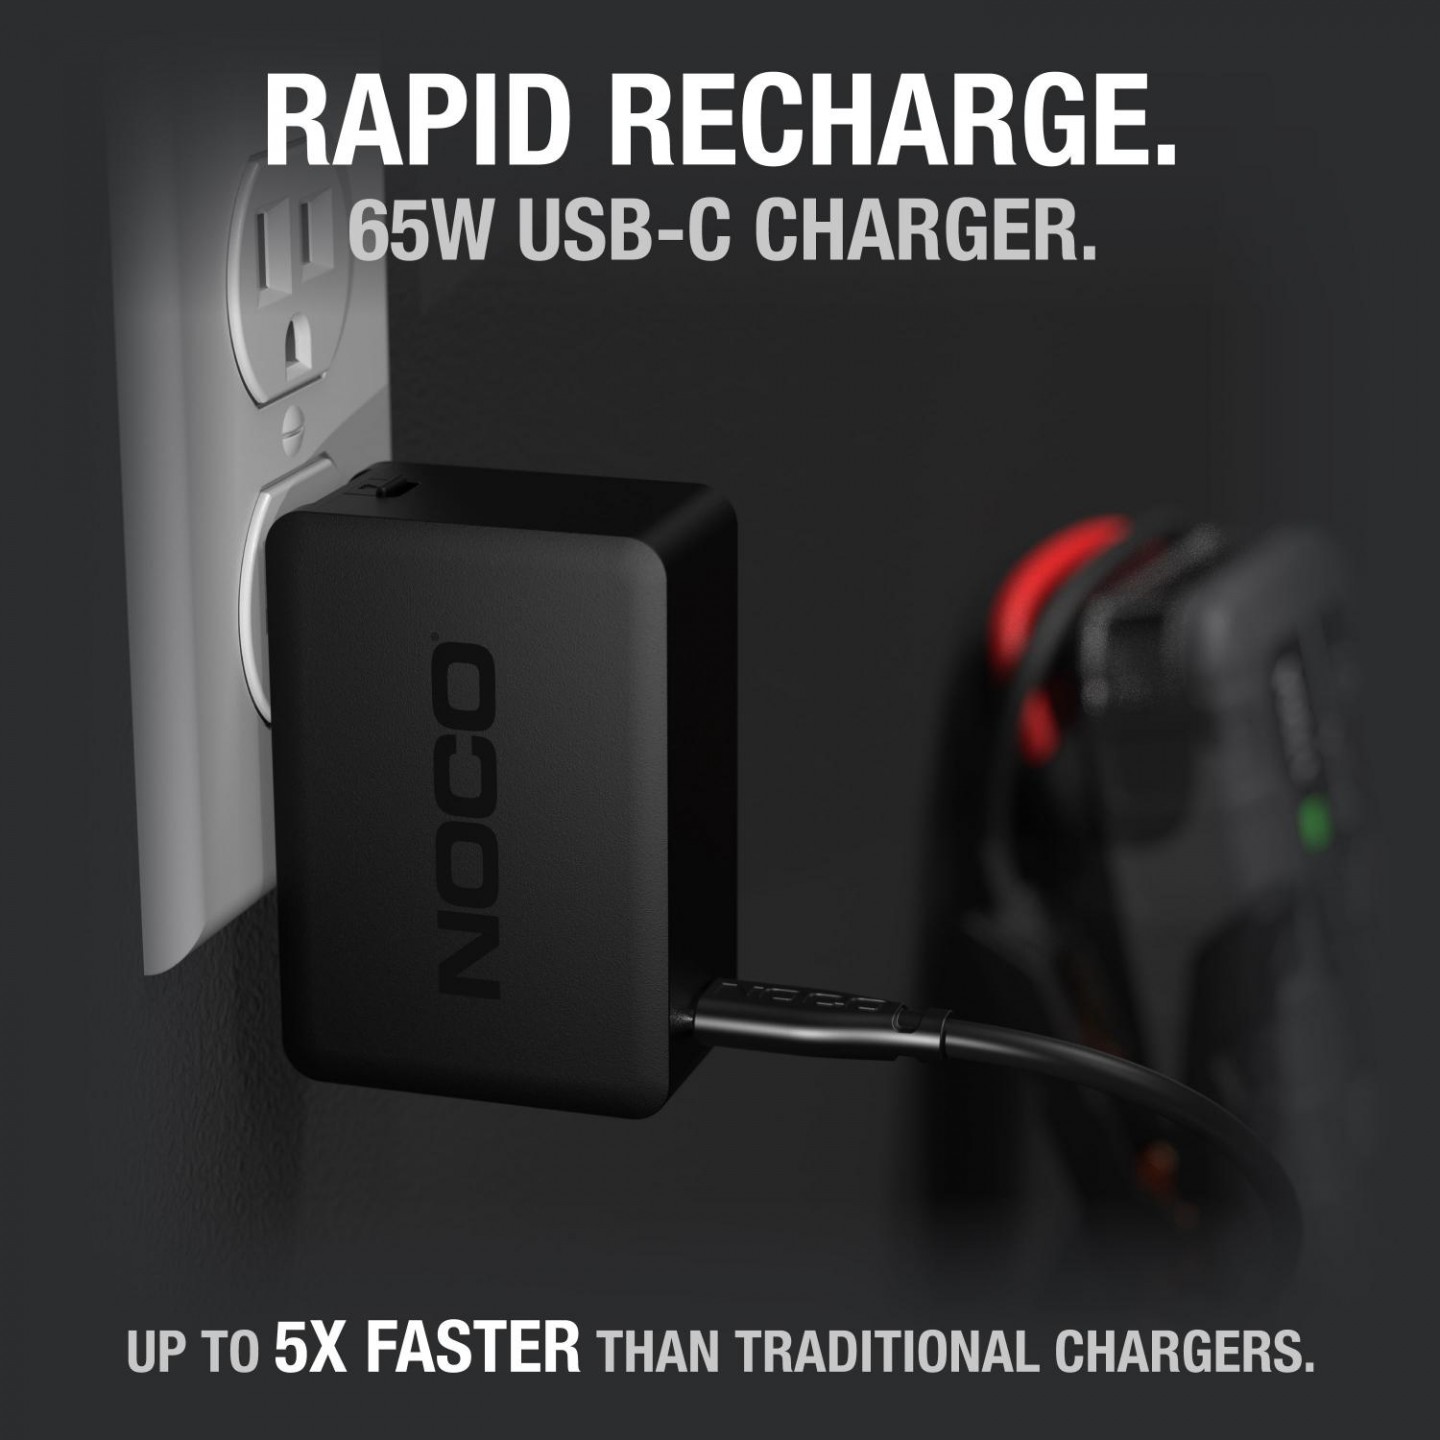 SMART QUICK CHARGER DATE Cable chargeur USB Type C de charge rapid